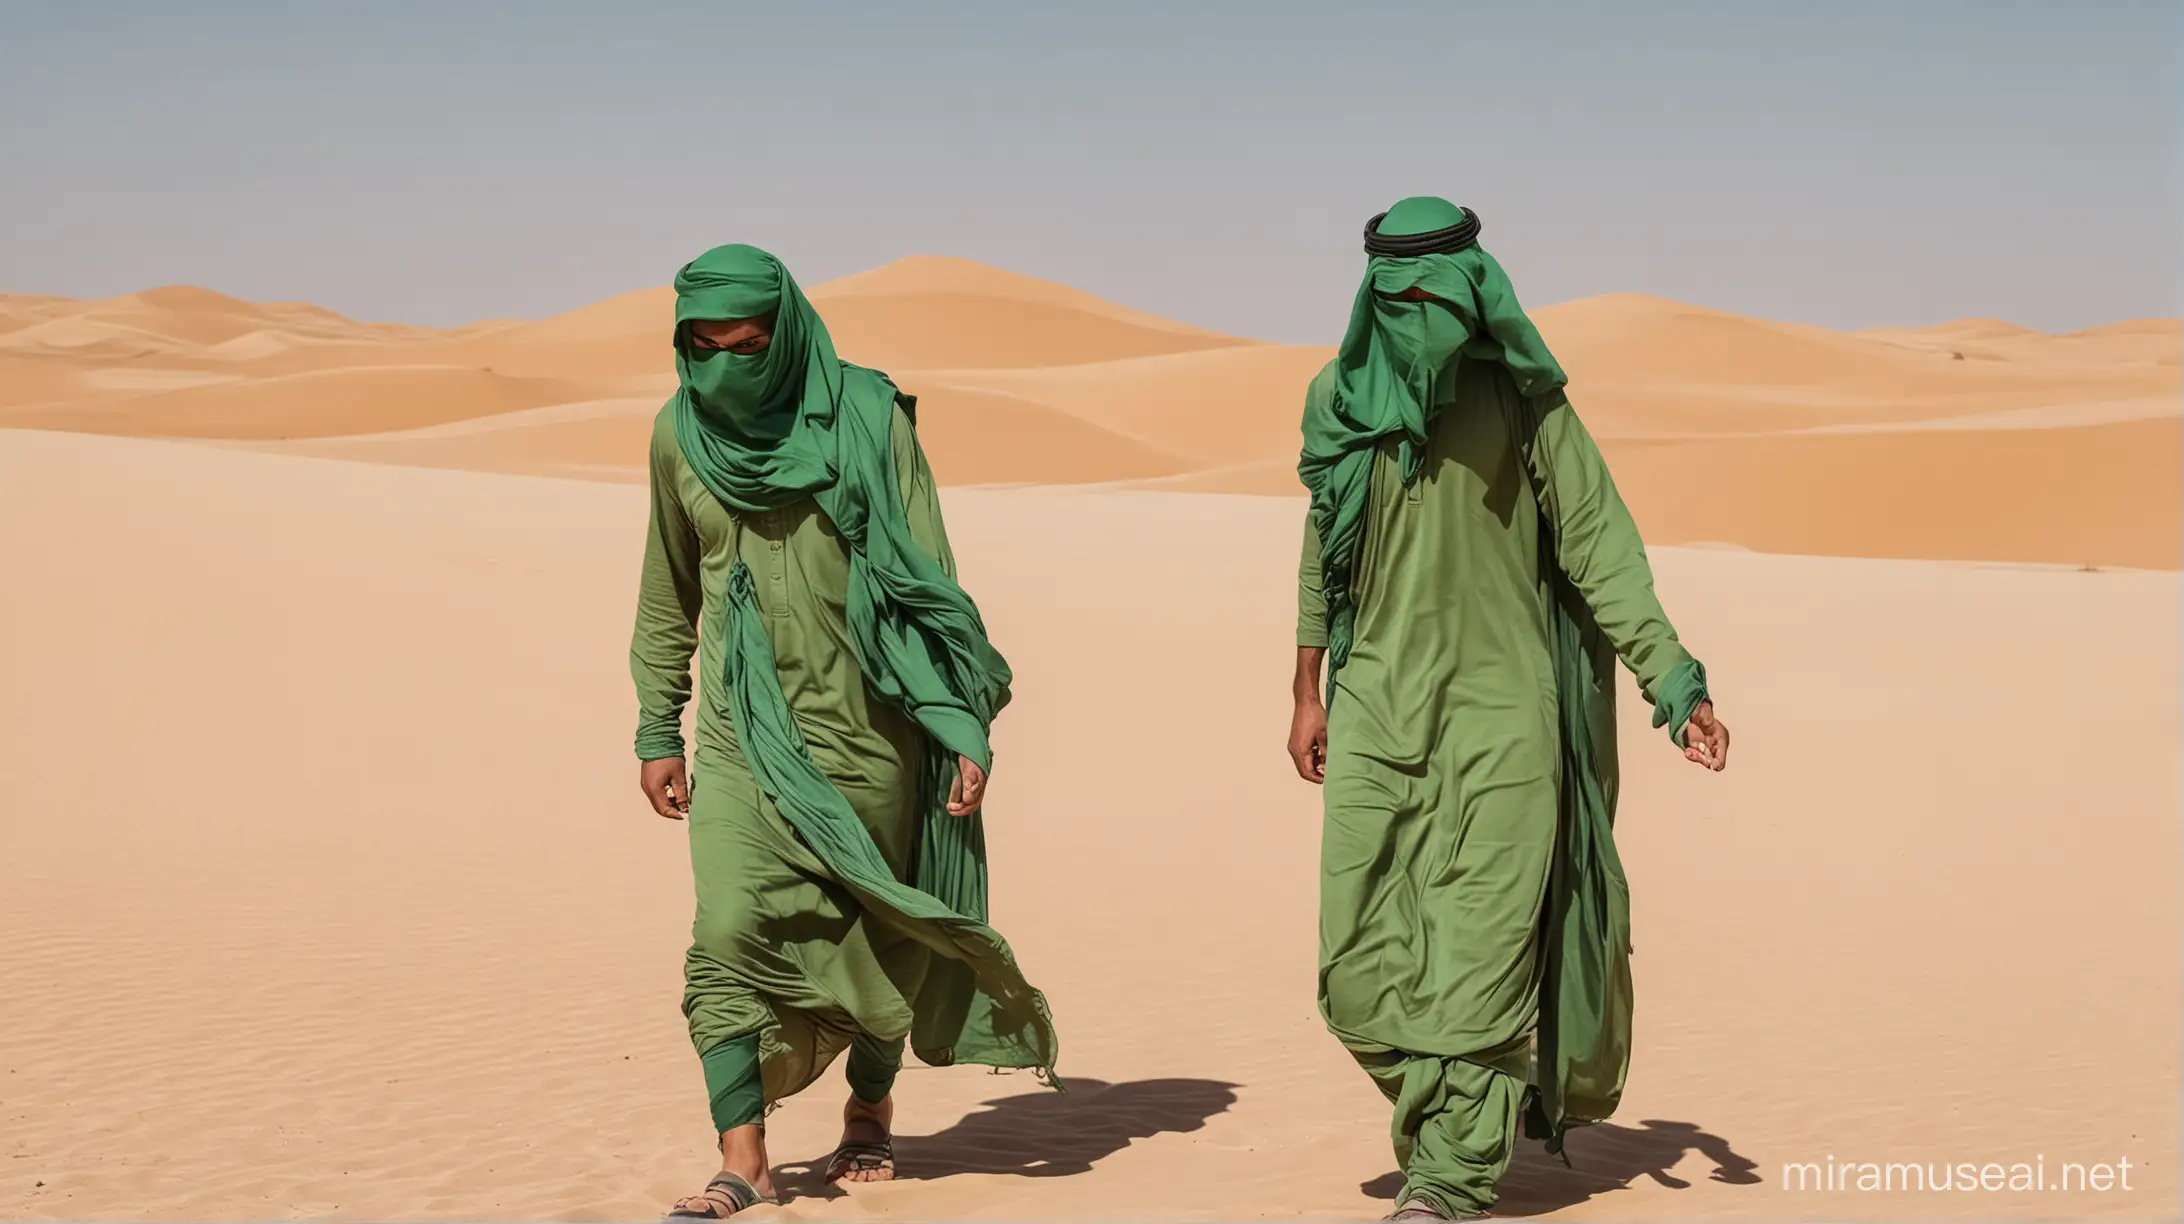 Two Arab Men Travelling in the Desert Traditional Clothing and Concealed Faces